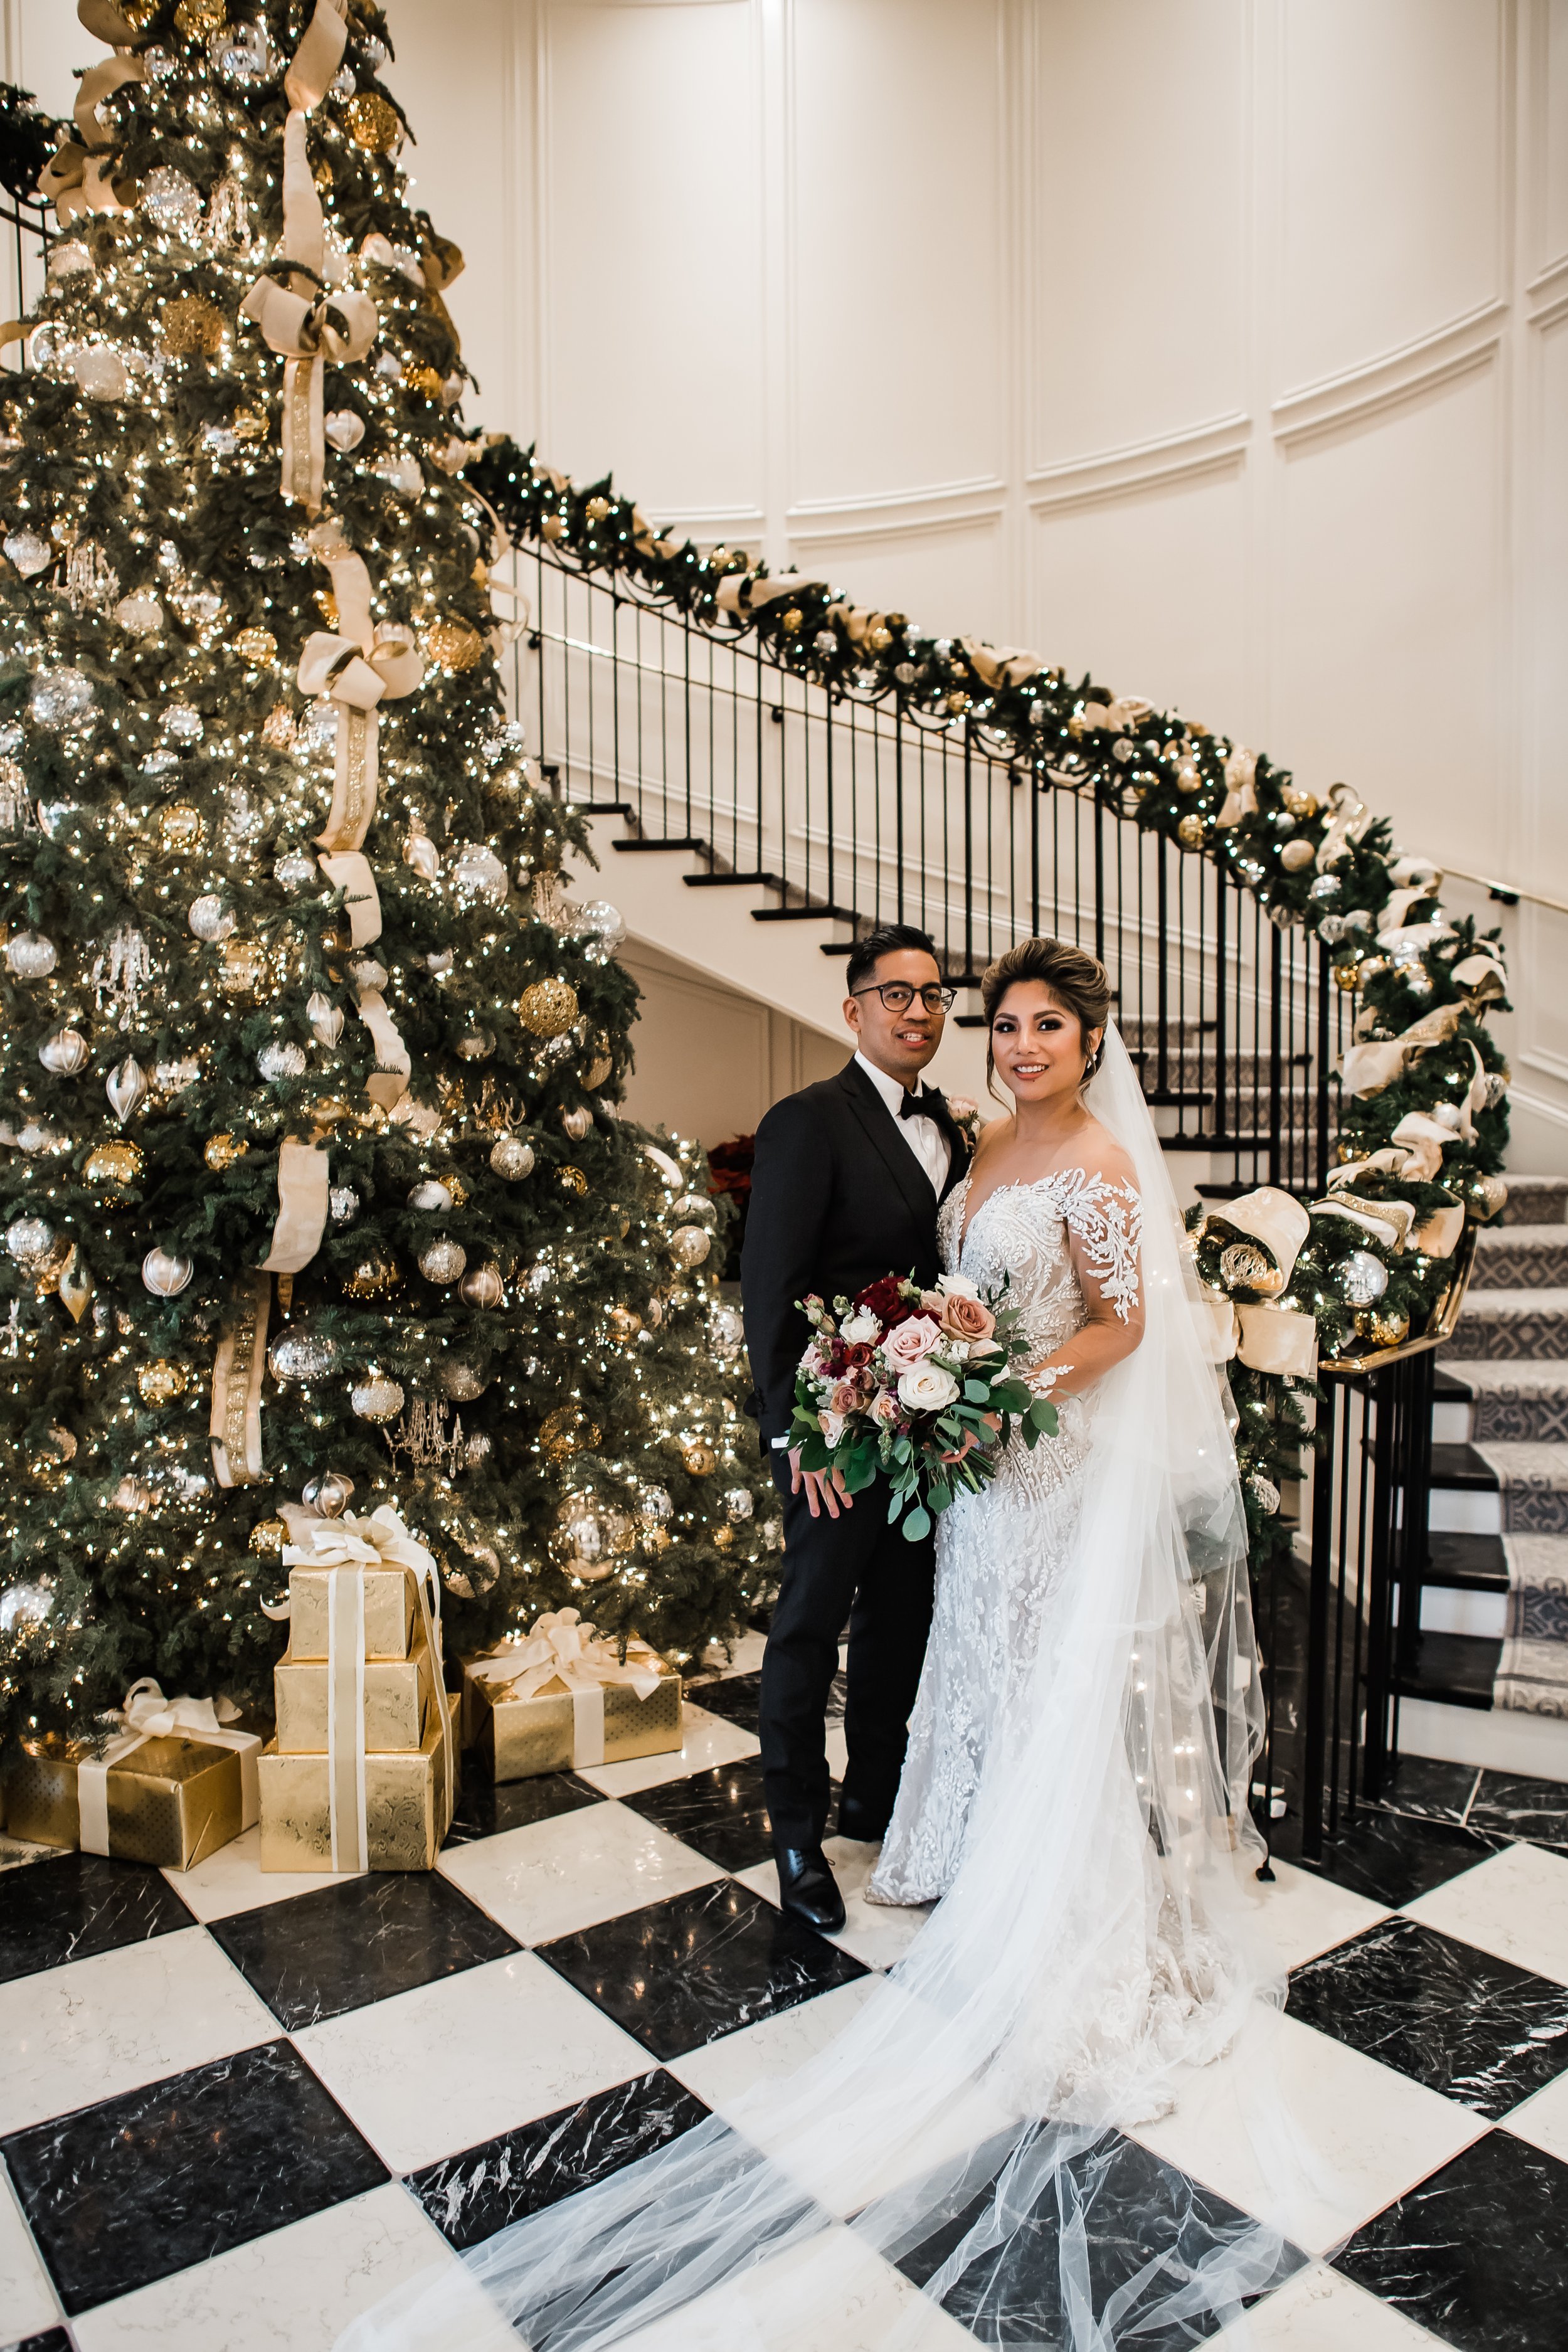 www.santabarbarawedding.com | Rosewood Miramar | Events by Maxi | Michelle Ramirez | Tangled Lotus | Bride and Groom Pose by a Christmas Tree Inside the Venue